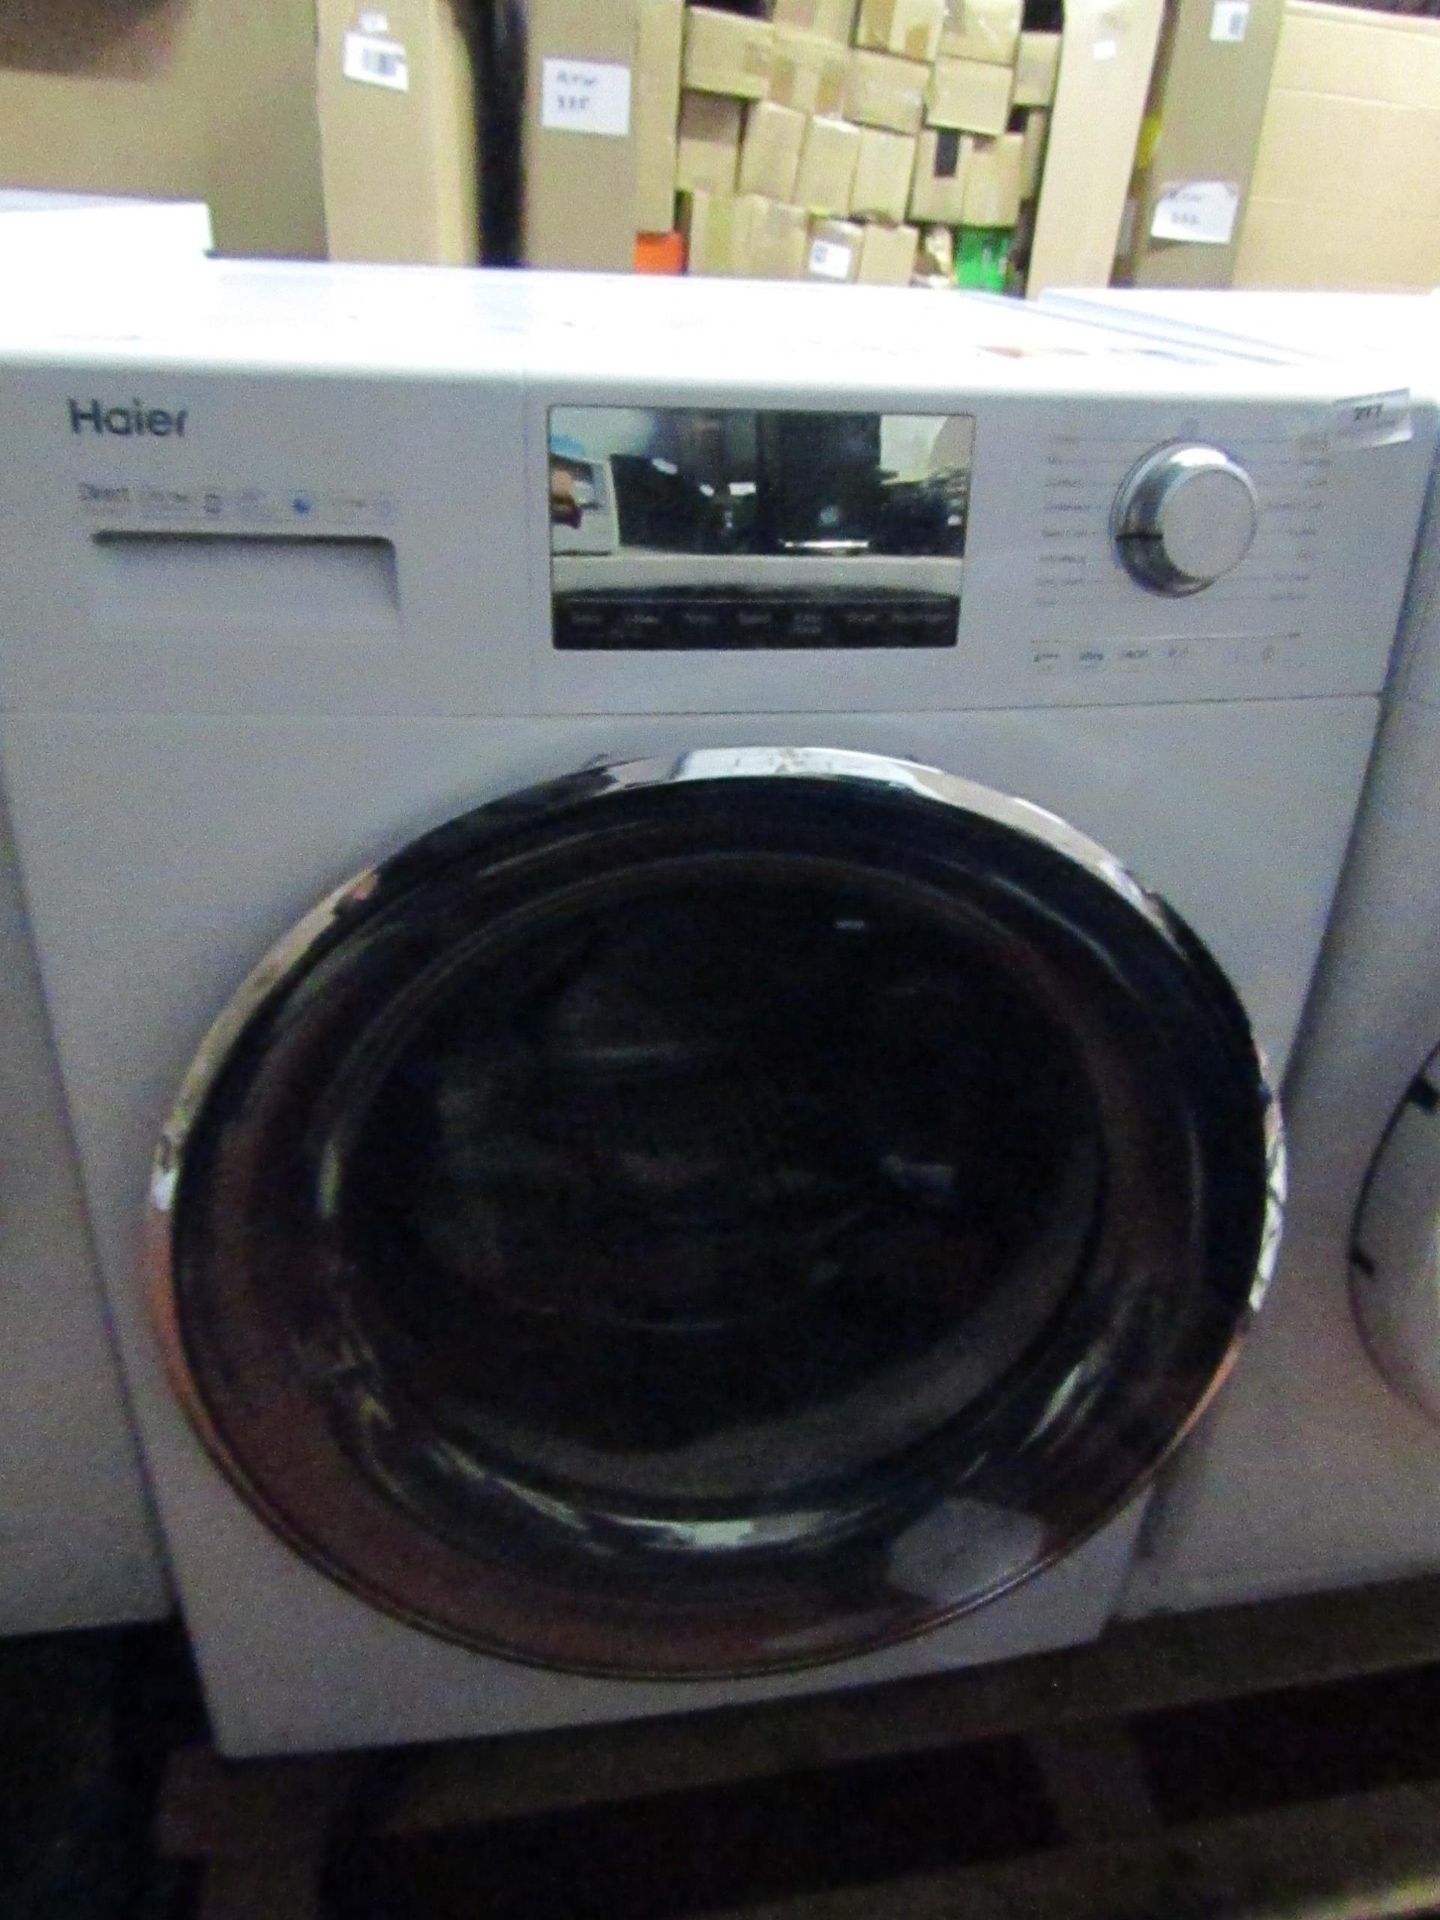 Haier Direct Motion 12Kg washing machine, unable to tested due to damaged plug.